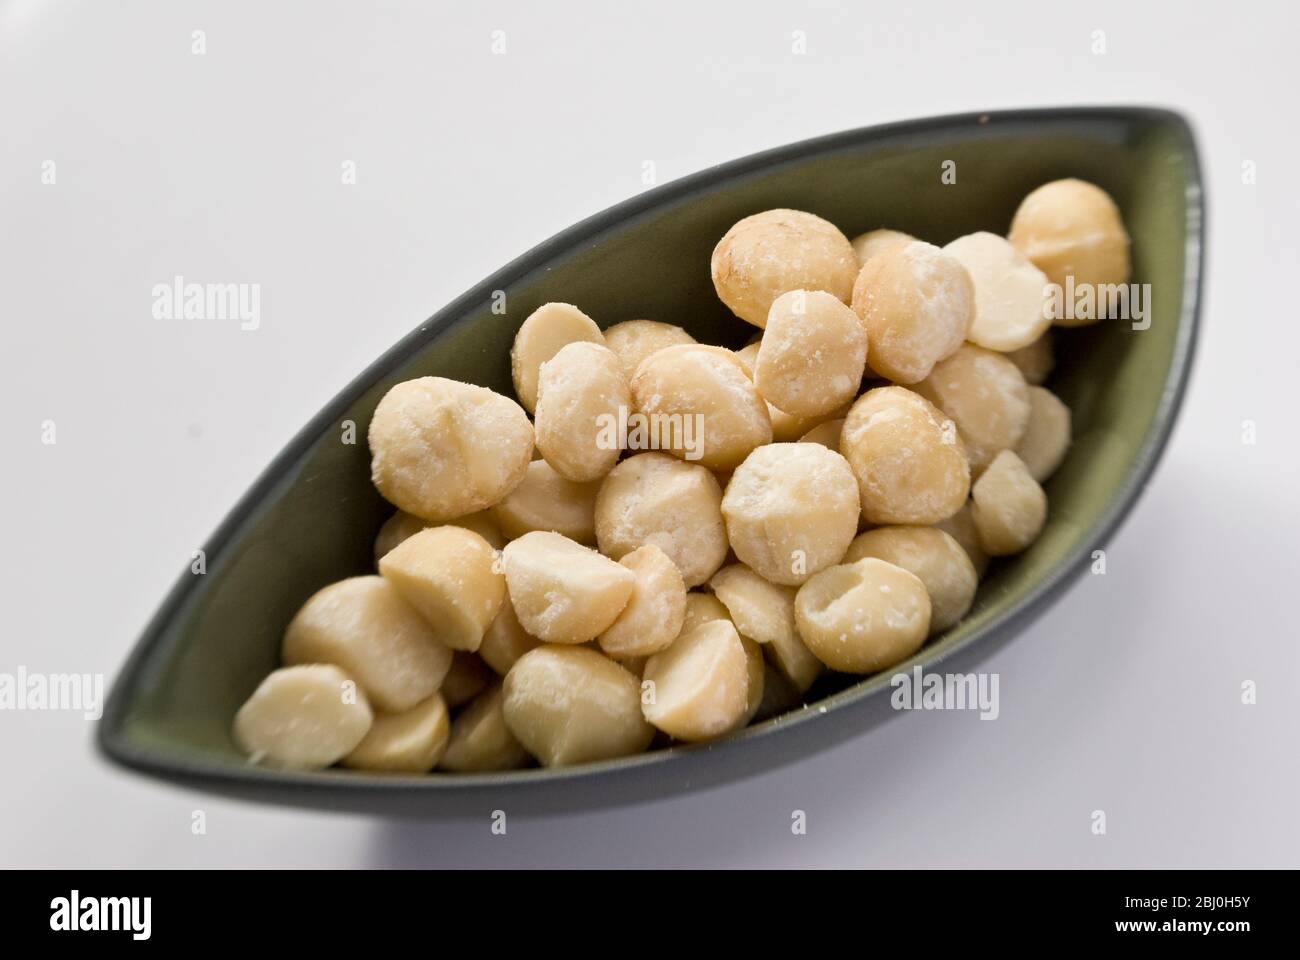 Shelled dry roasted macadamia nuts in bowl - Stock Photo